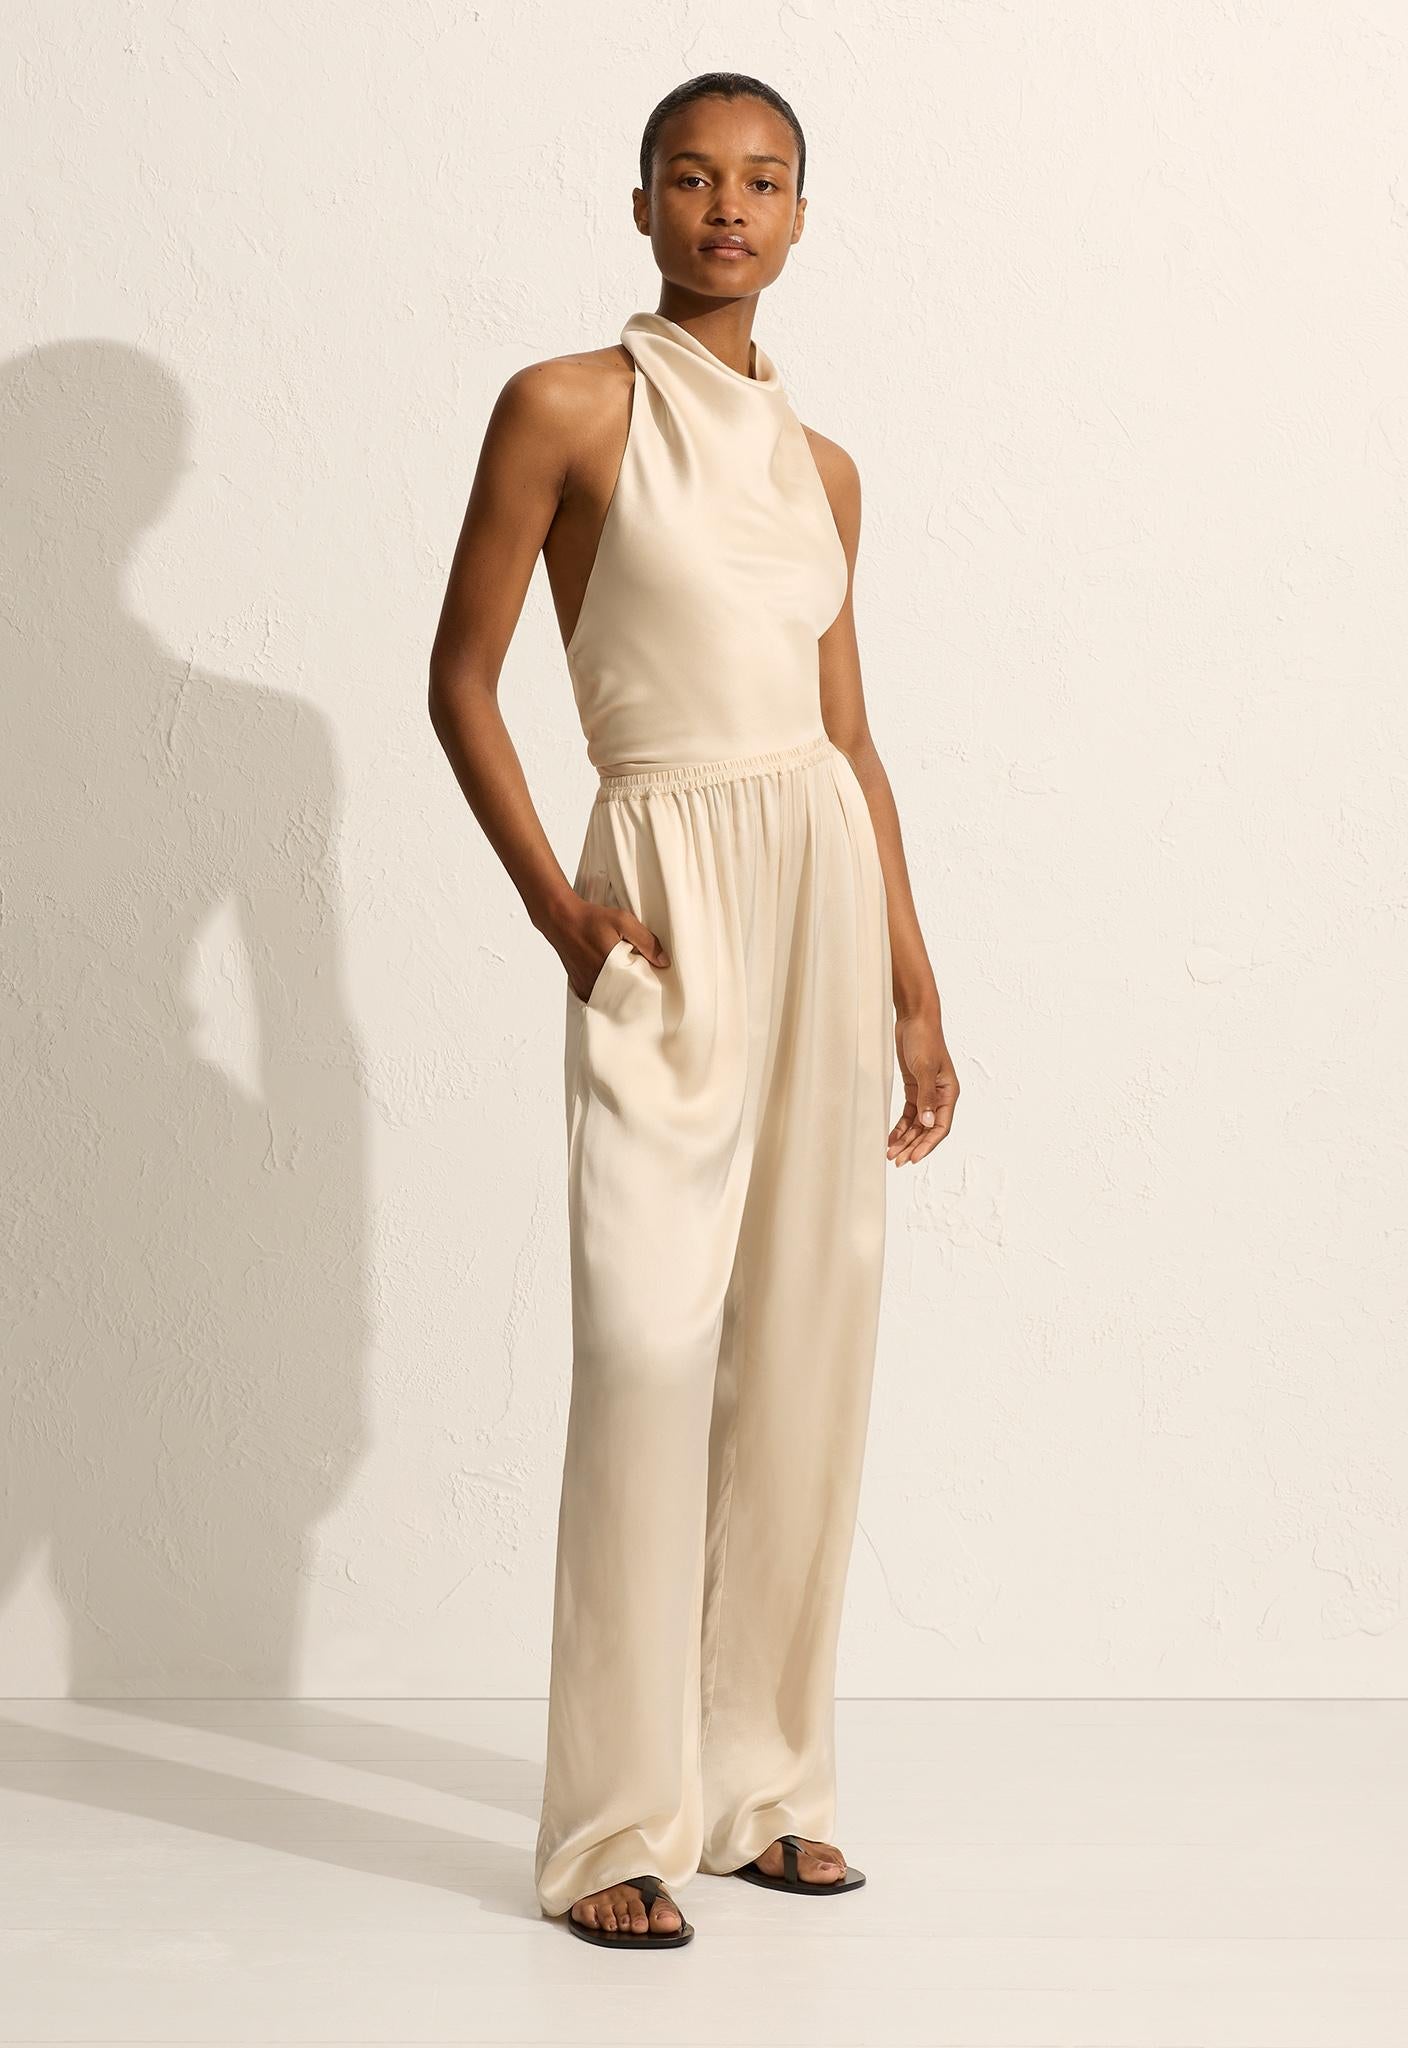 Matteau | Relaxed Satin Pant - Ivory